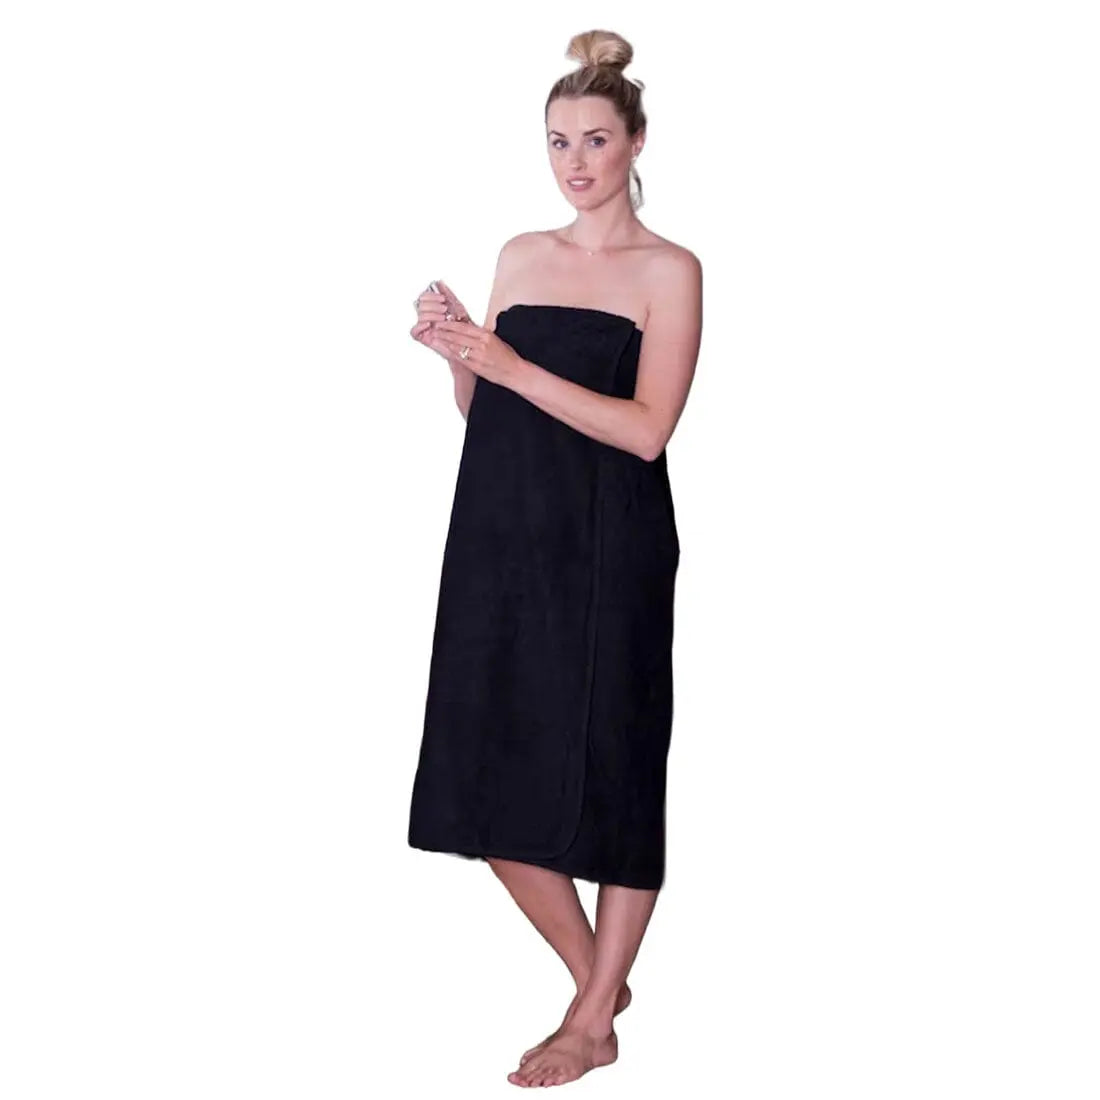 black sarong on blonde model against a white background